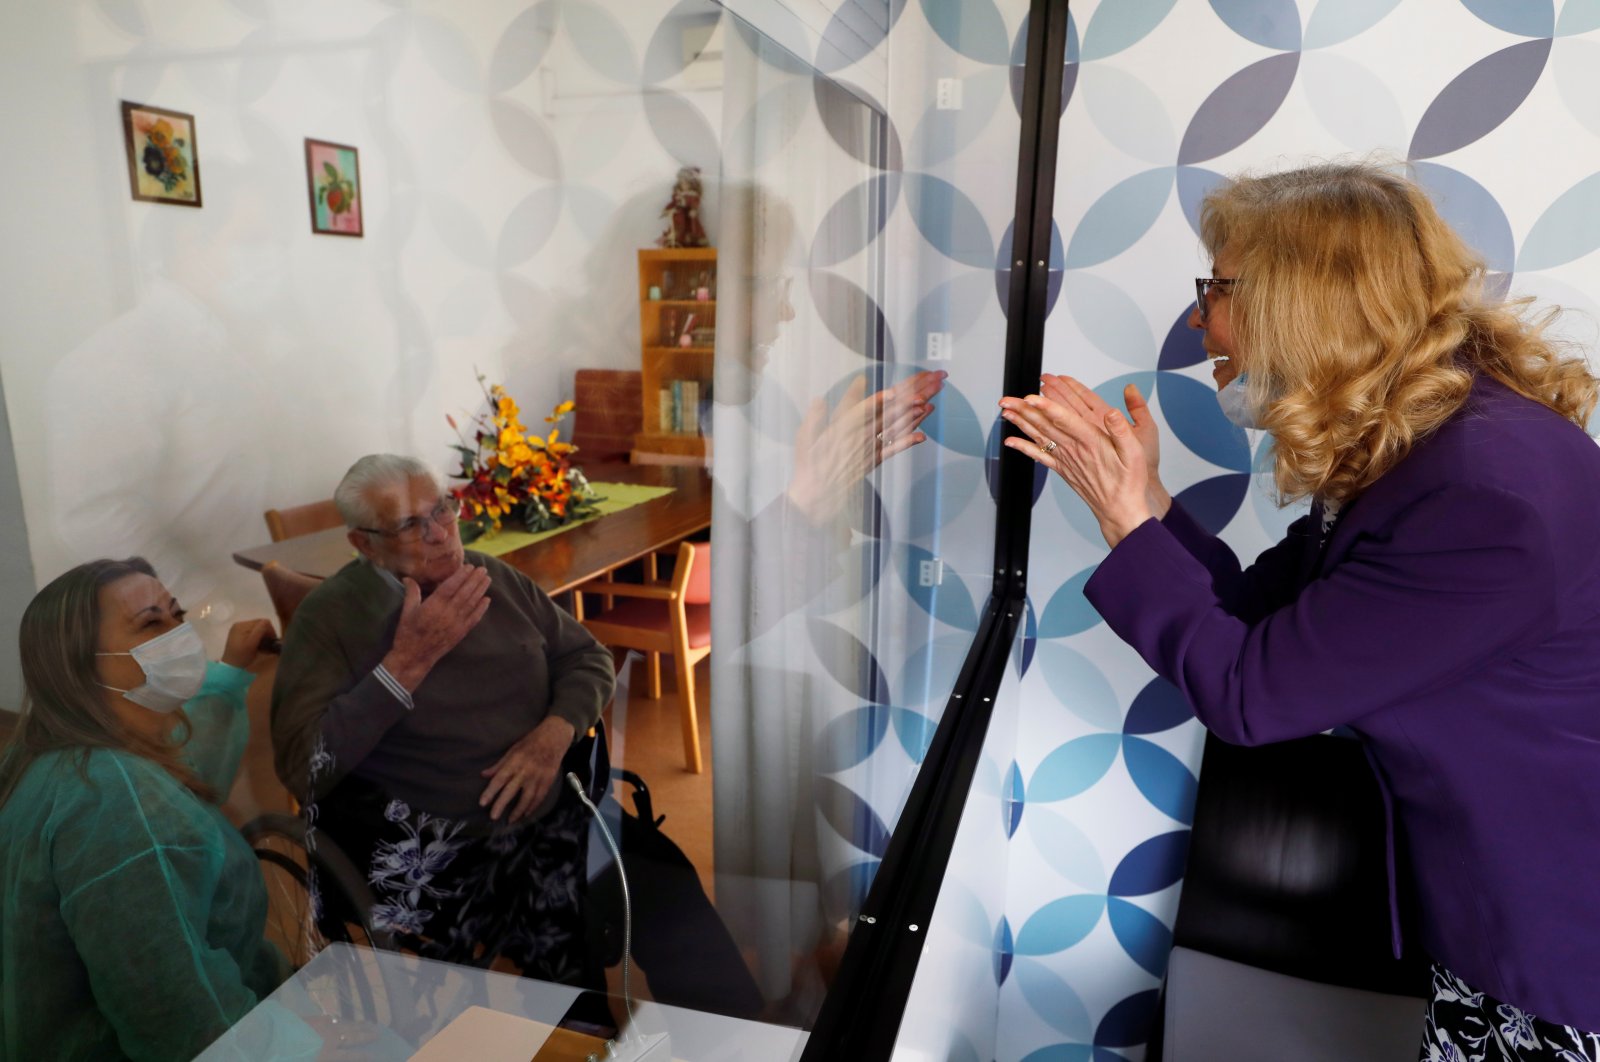 Maria das Merces speaks with her father Adriano Borges through a glass window to prevent infection at an elderly residence as the spread of the coronavirus disease continues, Montijo, Portugal, May 12, 2020.